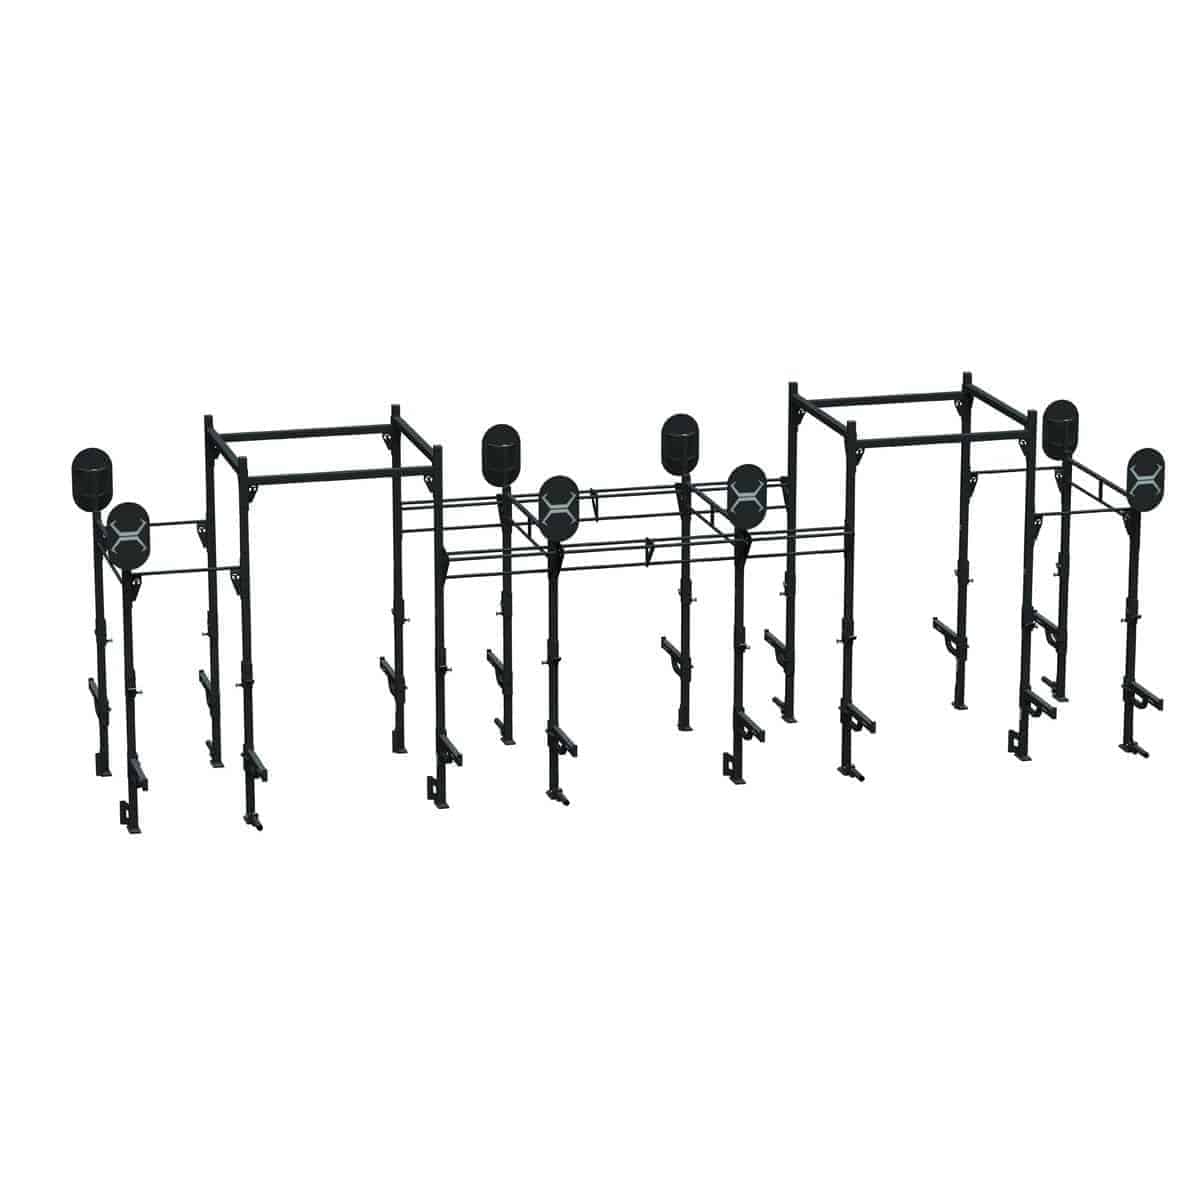 34 X 6 Pull-Up Rack - X1 Package